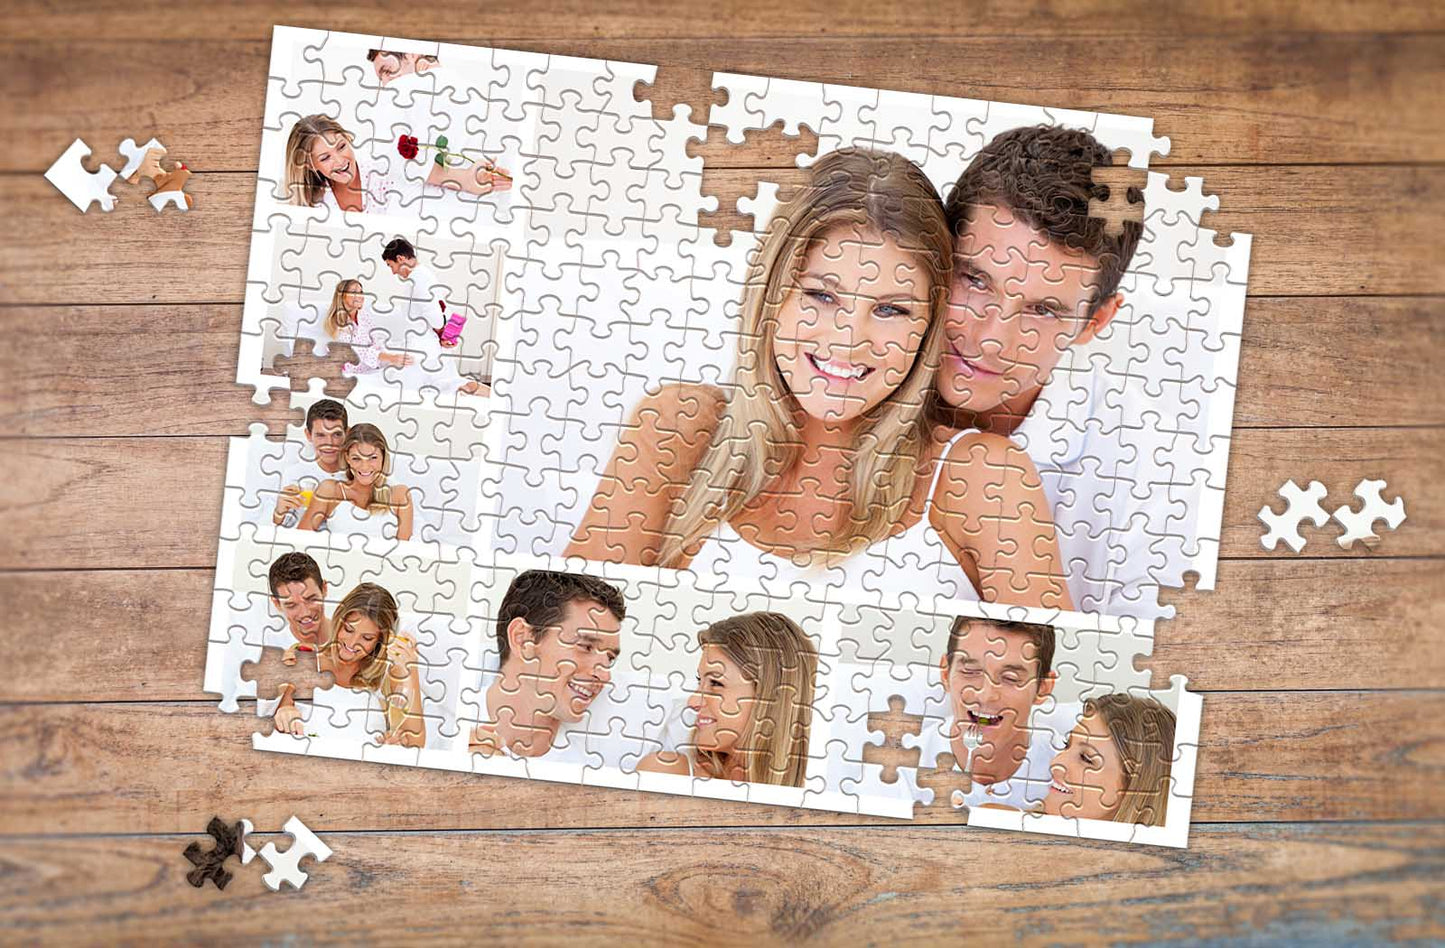 252 Piece Photo Collage Puzzle with young couple selfies | Premium Collage Photo Puzzles Made in the USA | Make Your Own Puzzle at MakeYourPuzzles.com